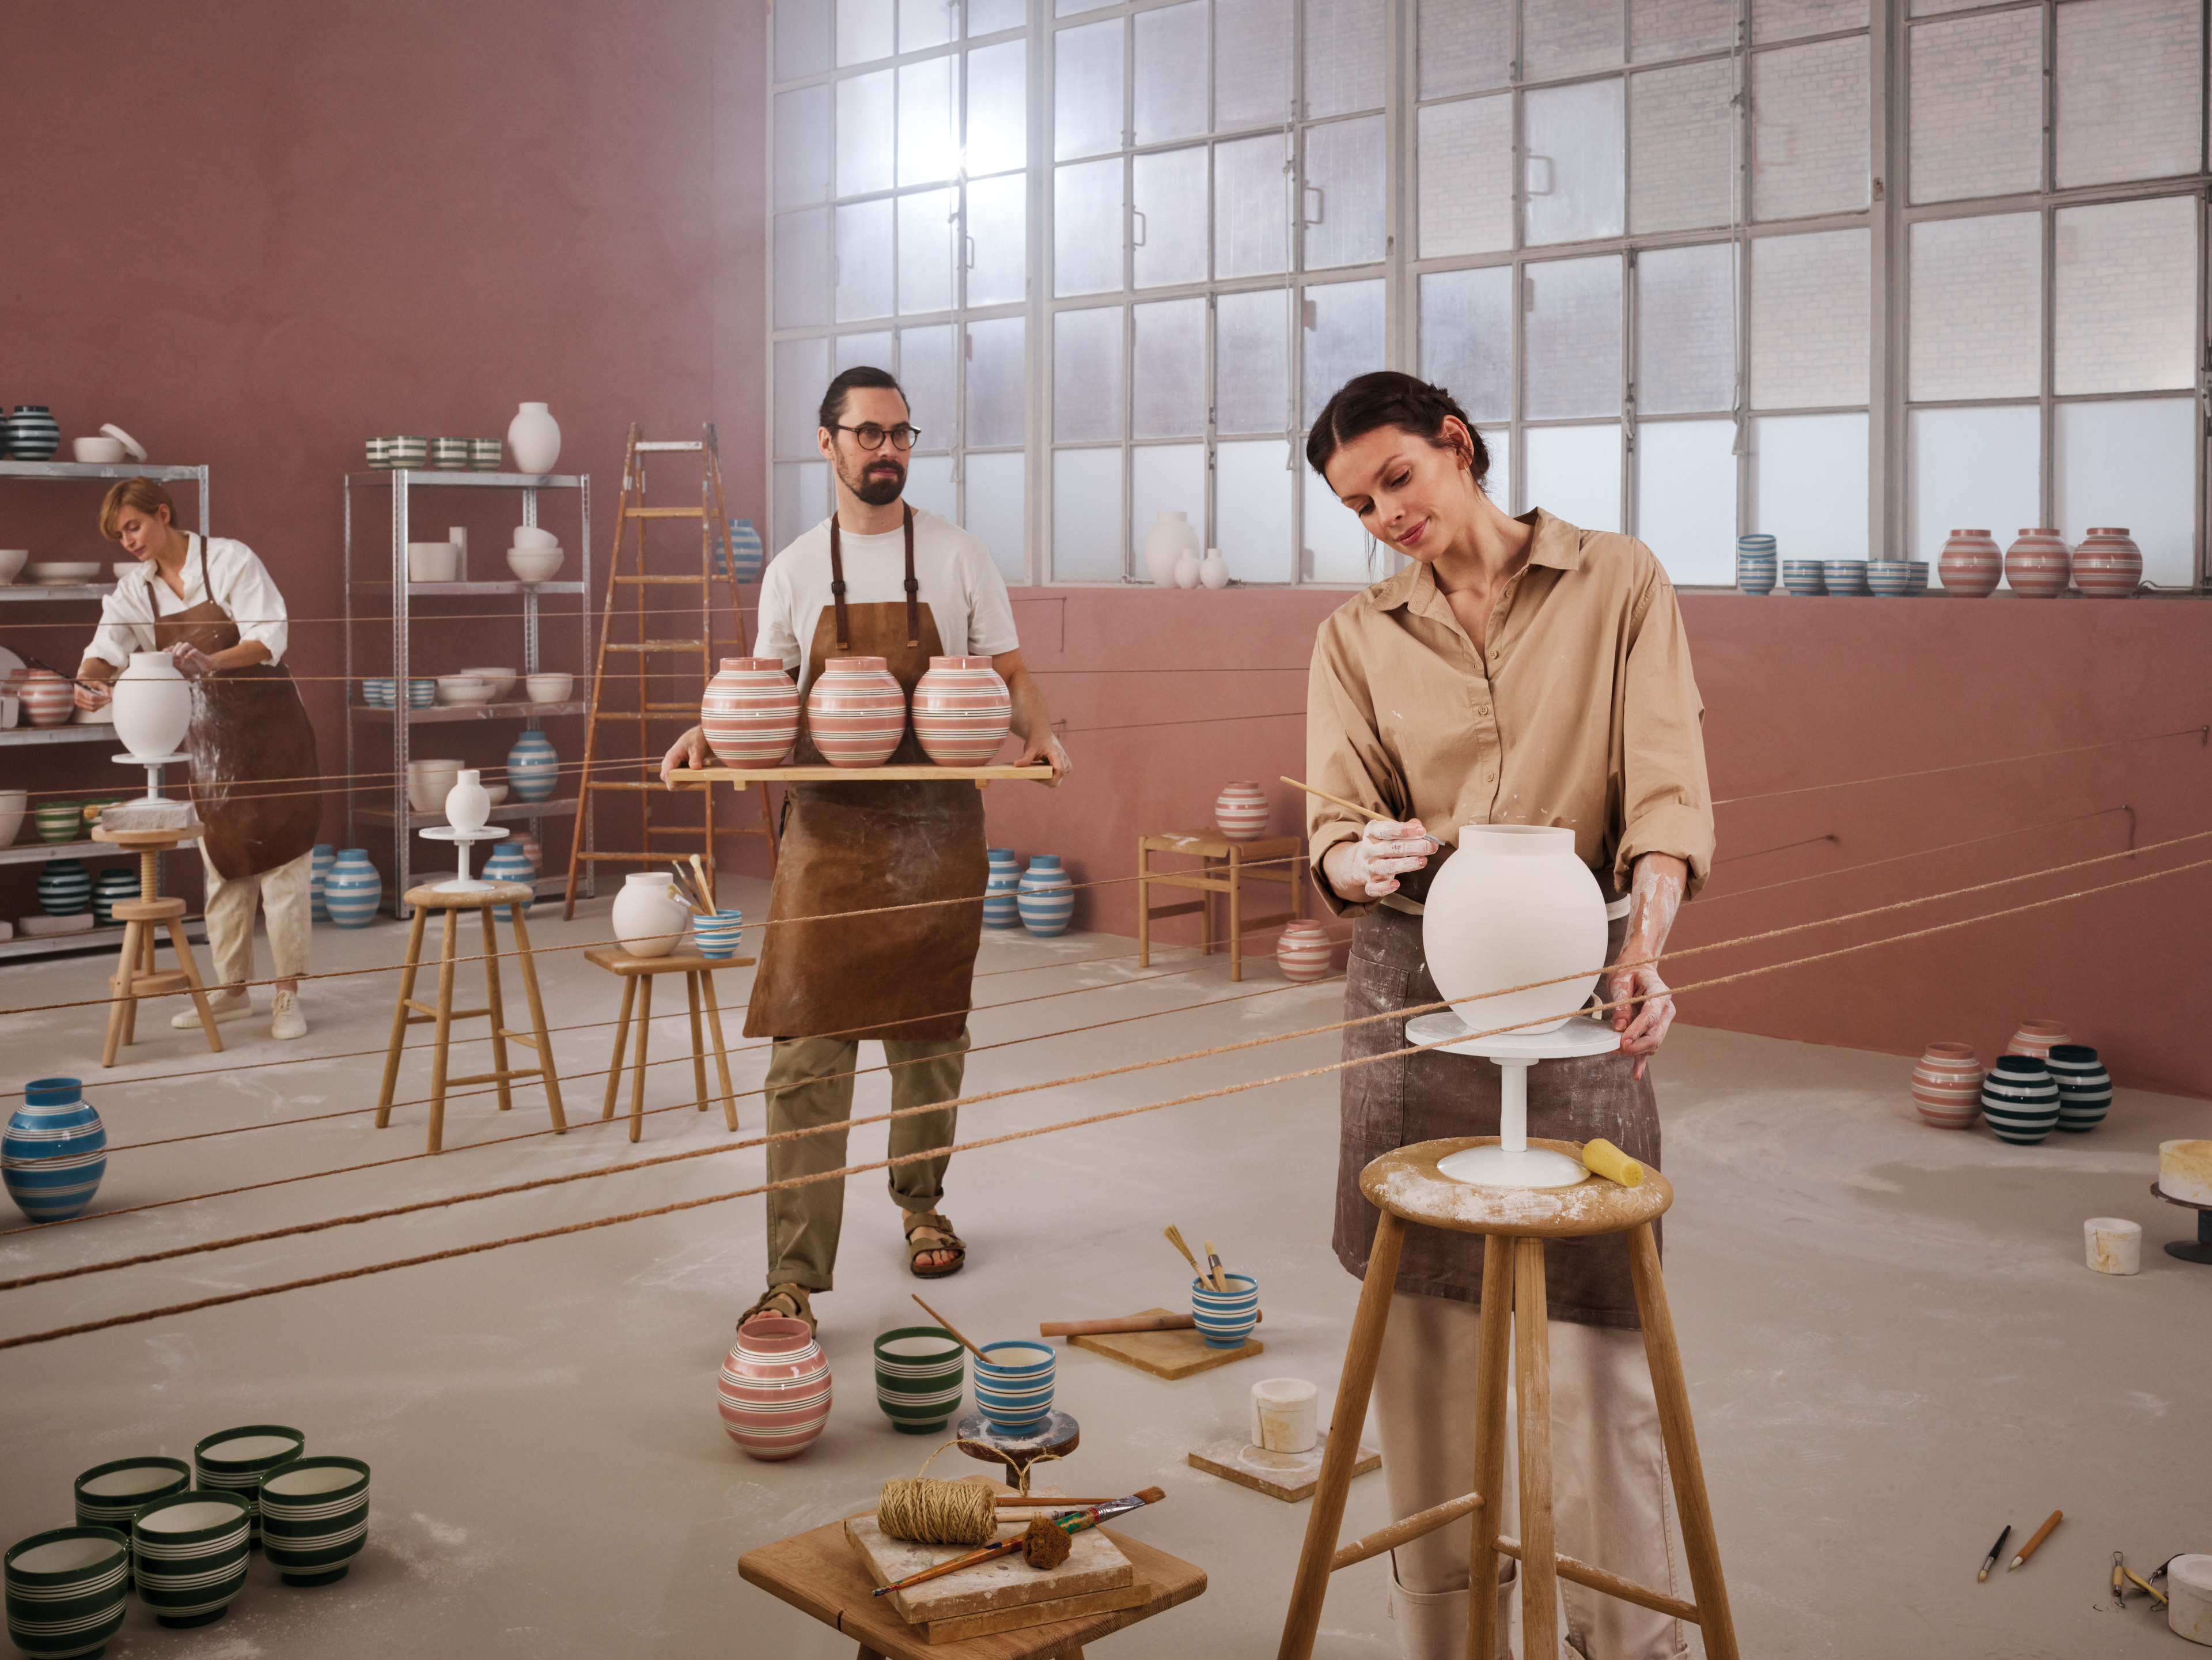 Vases are cast, turned and painted by artists